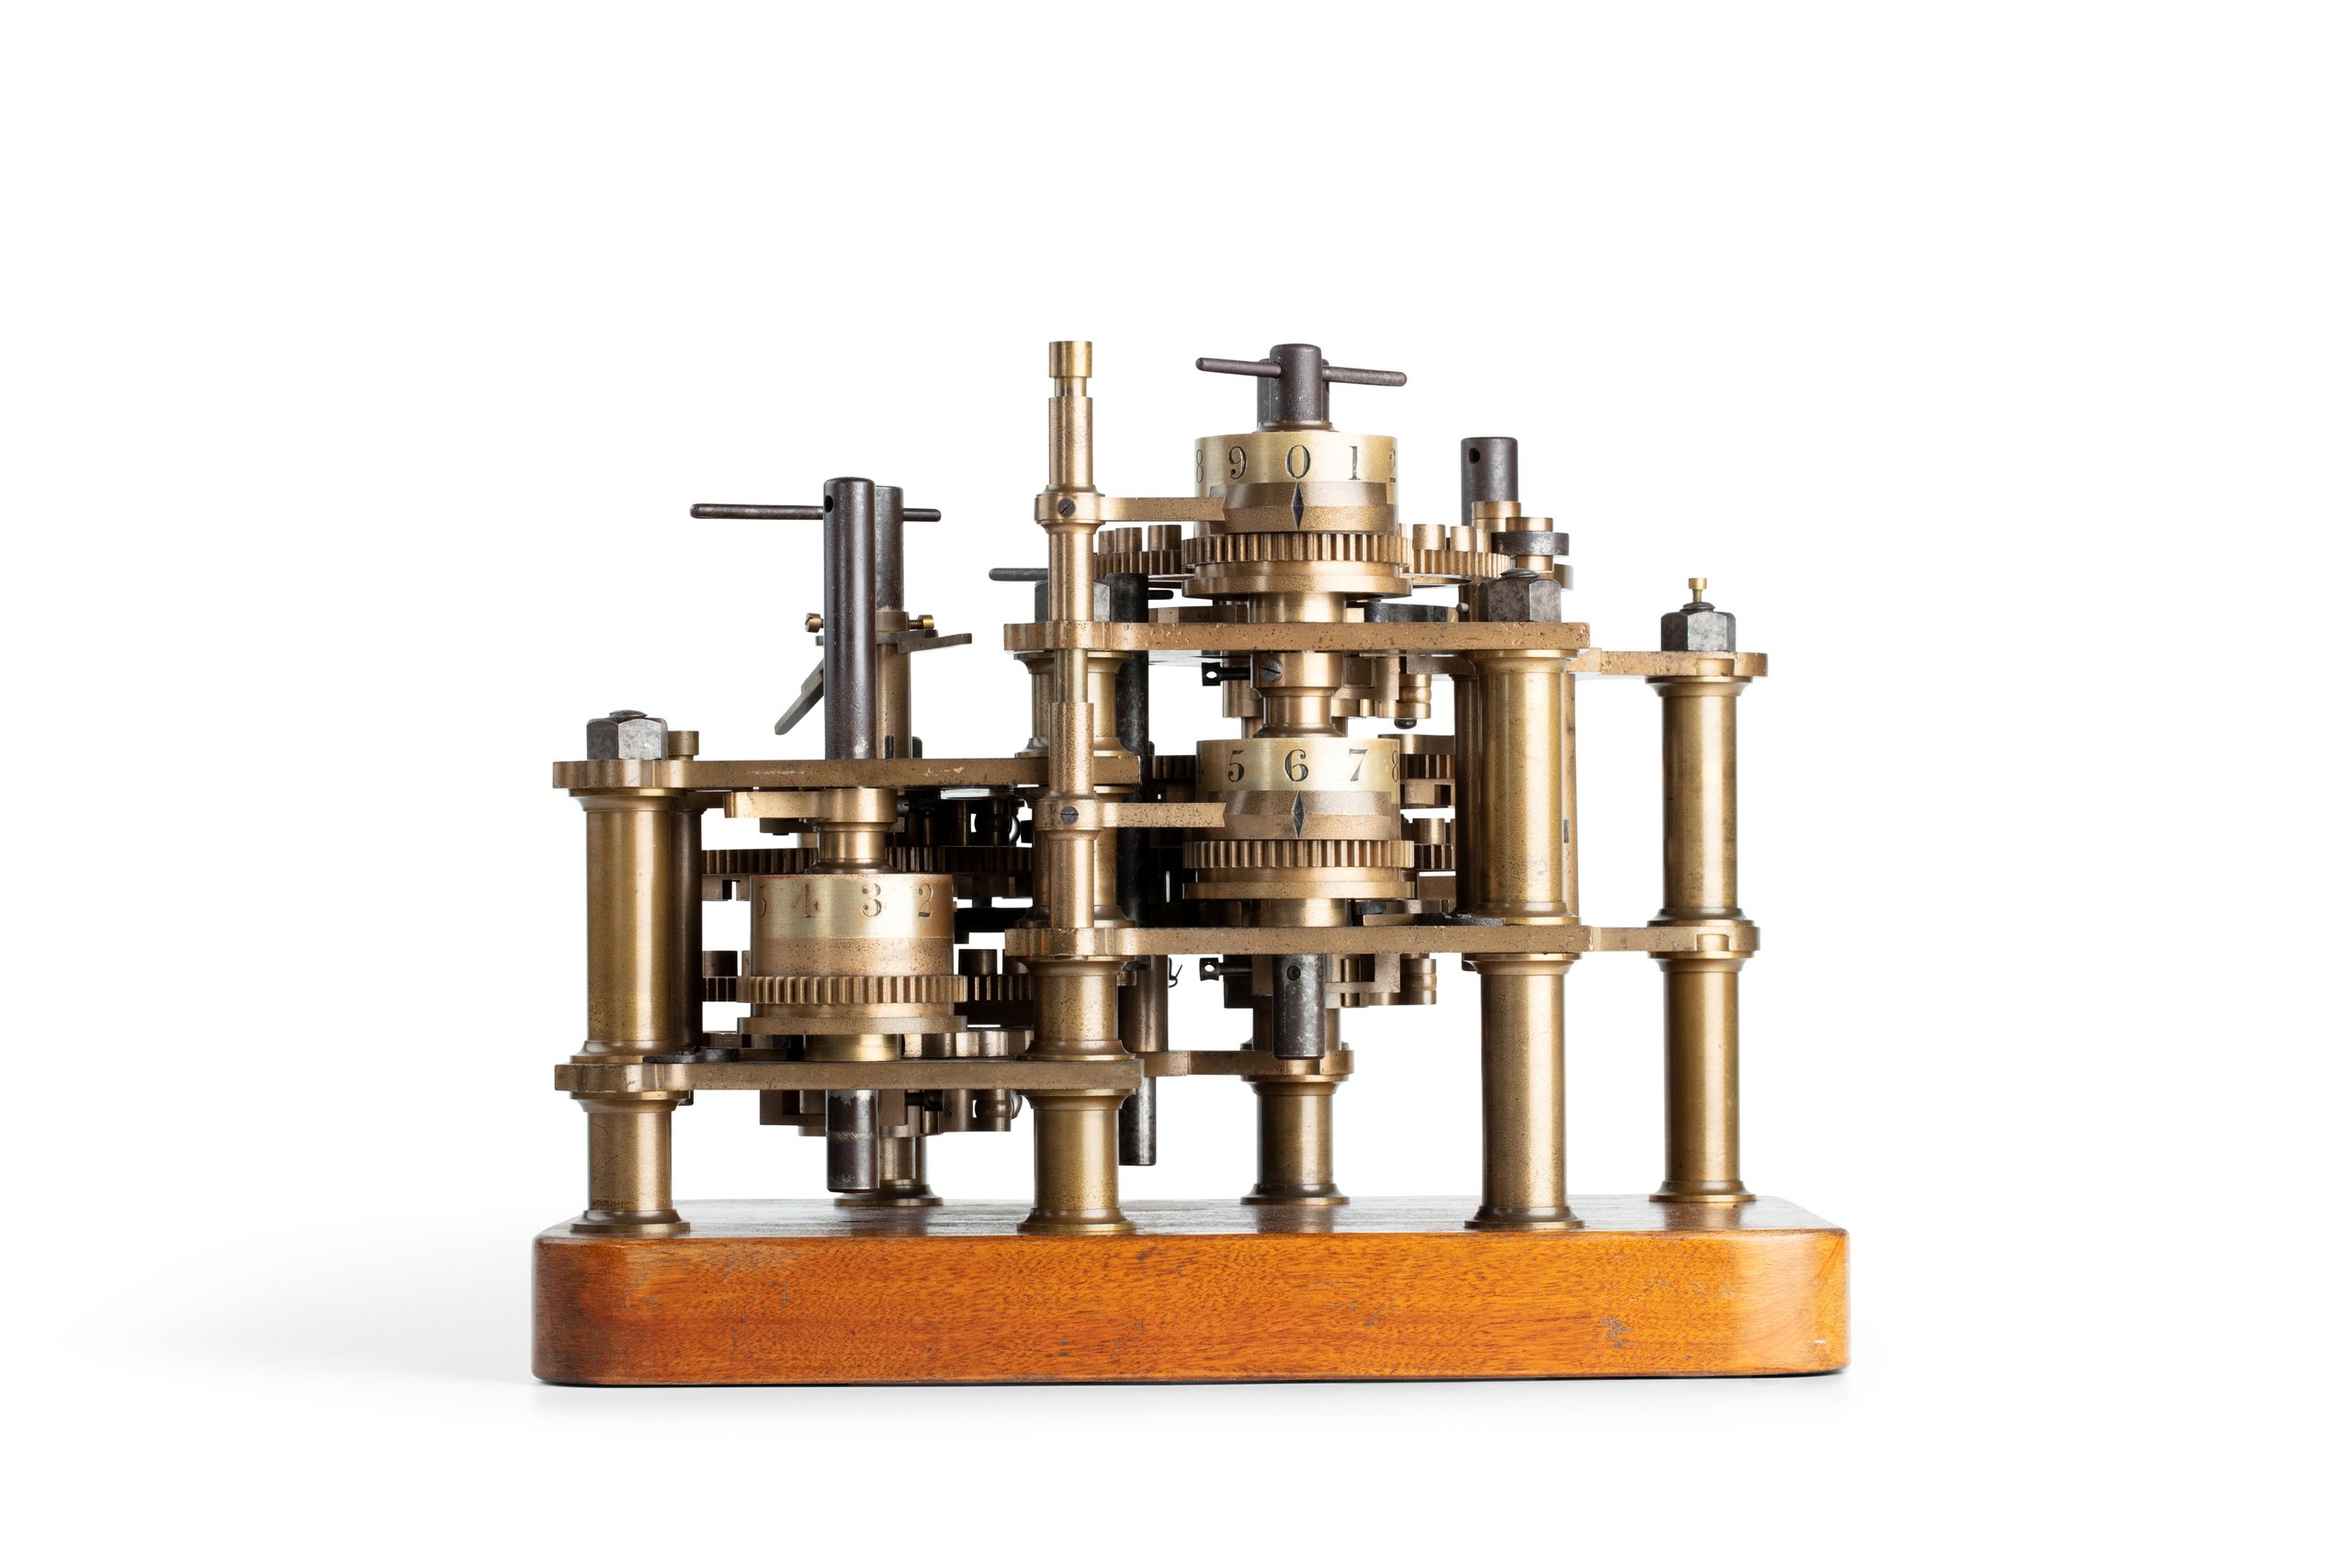 Babbage 'Difference Engine No 1' calculating engine